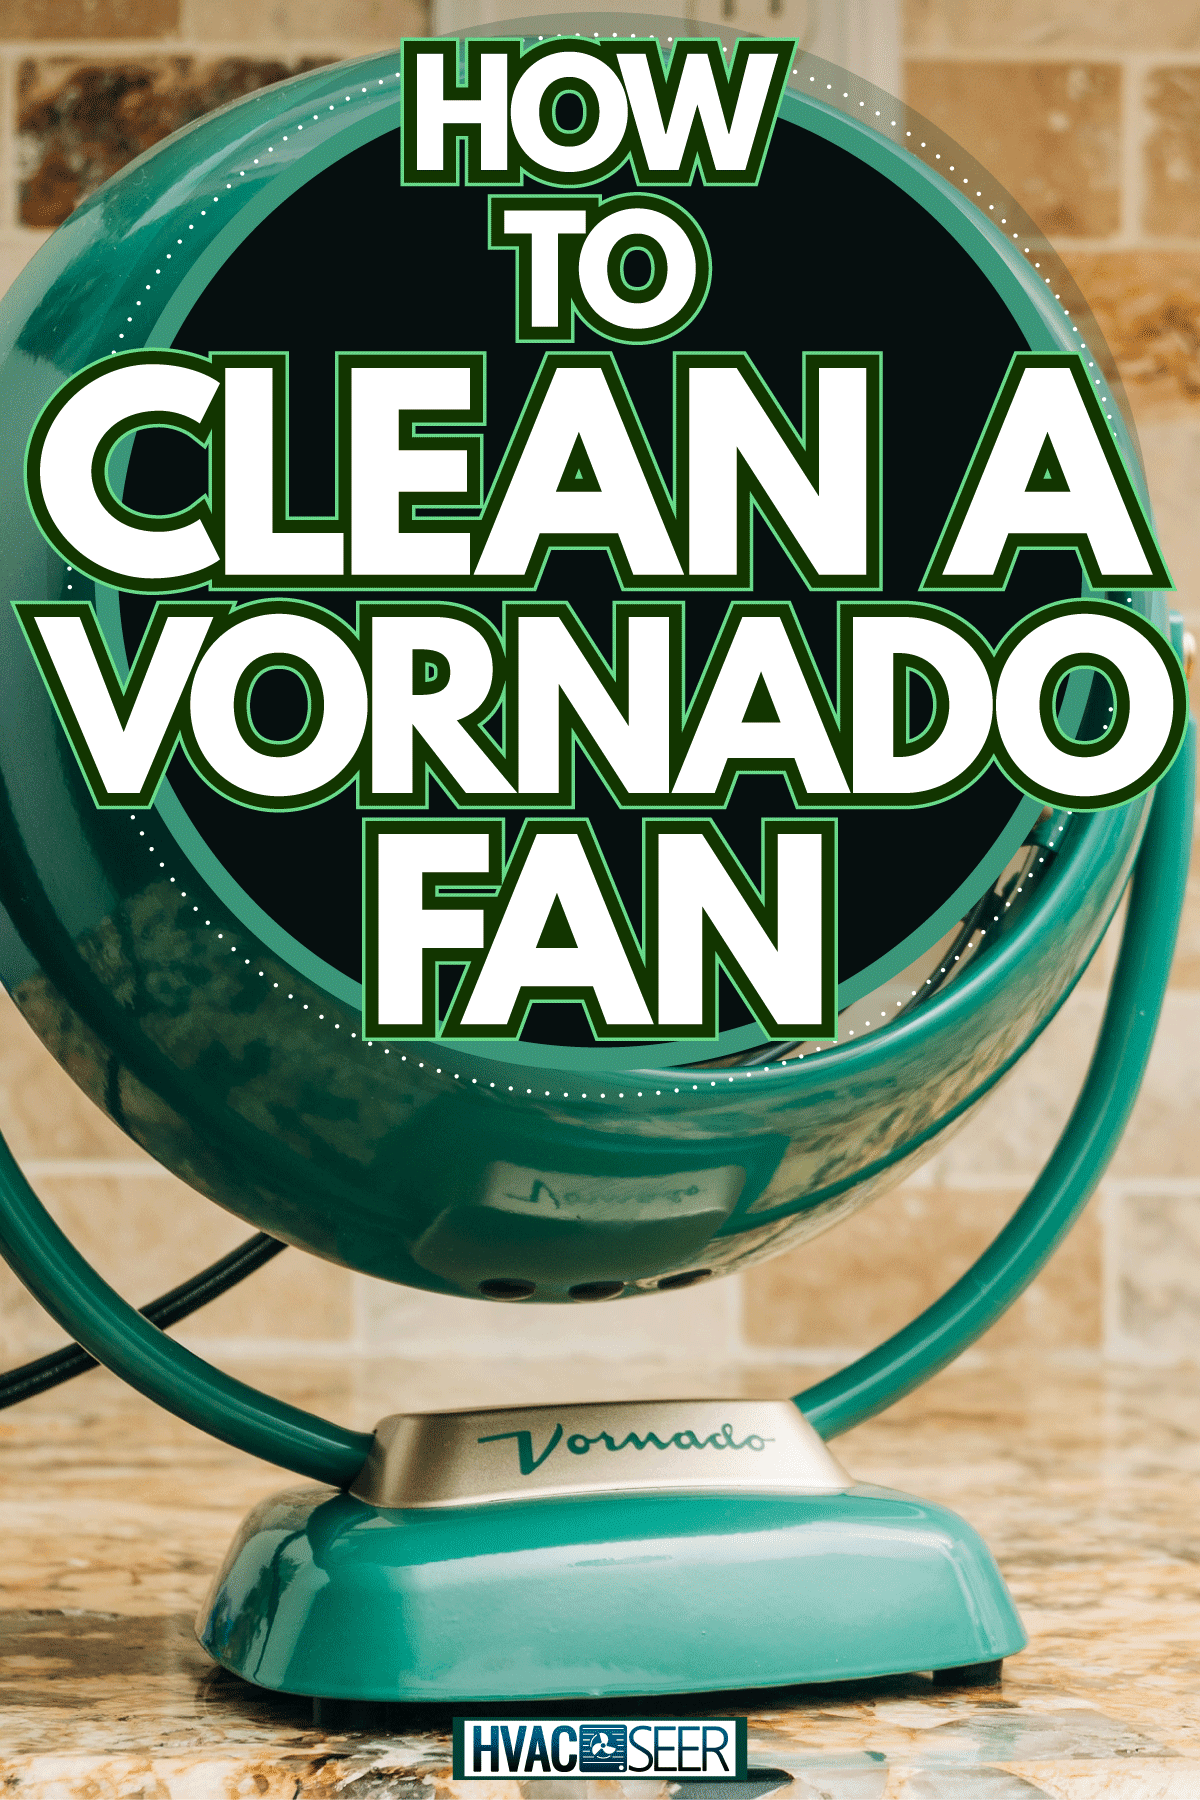 A small green Vornado fan on at the corner of the room, How To Clean A Vornado Fan